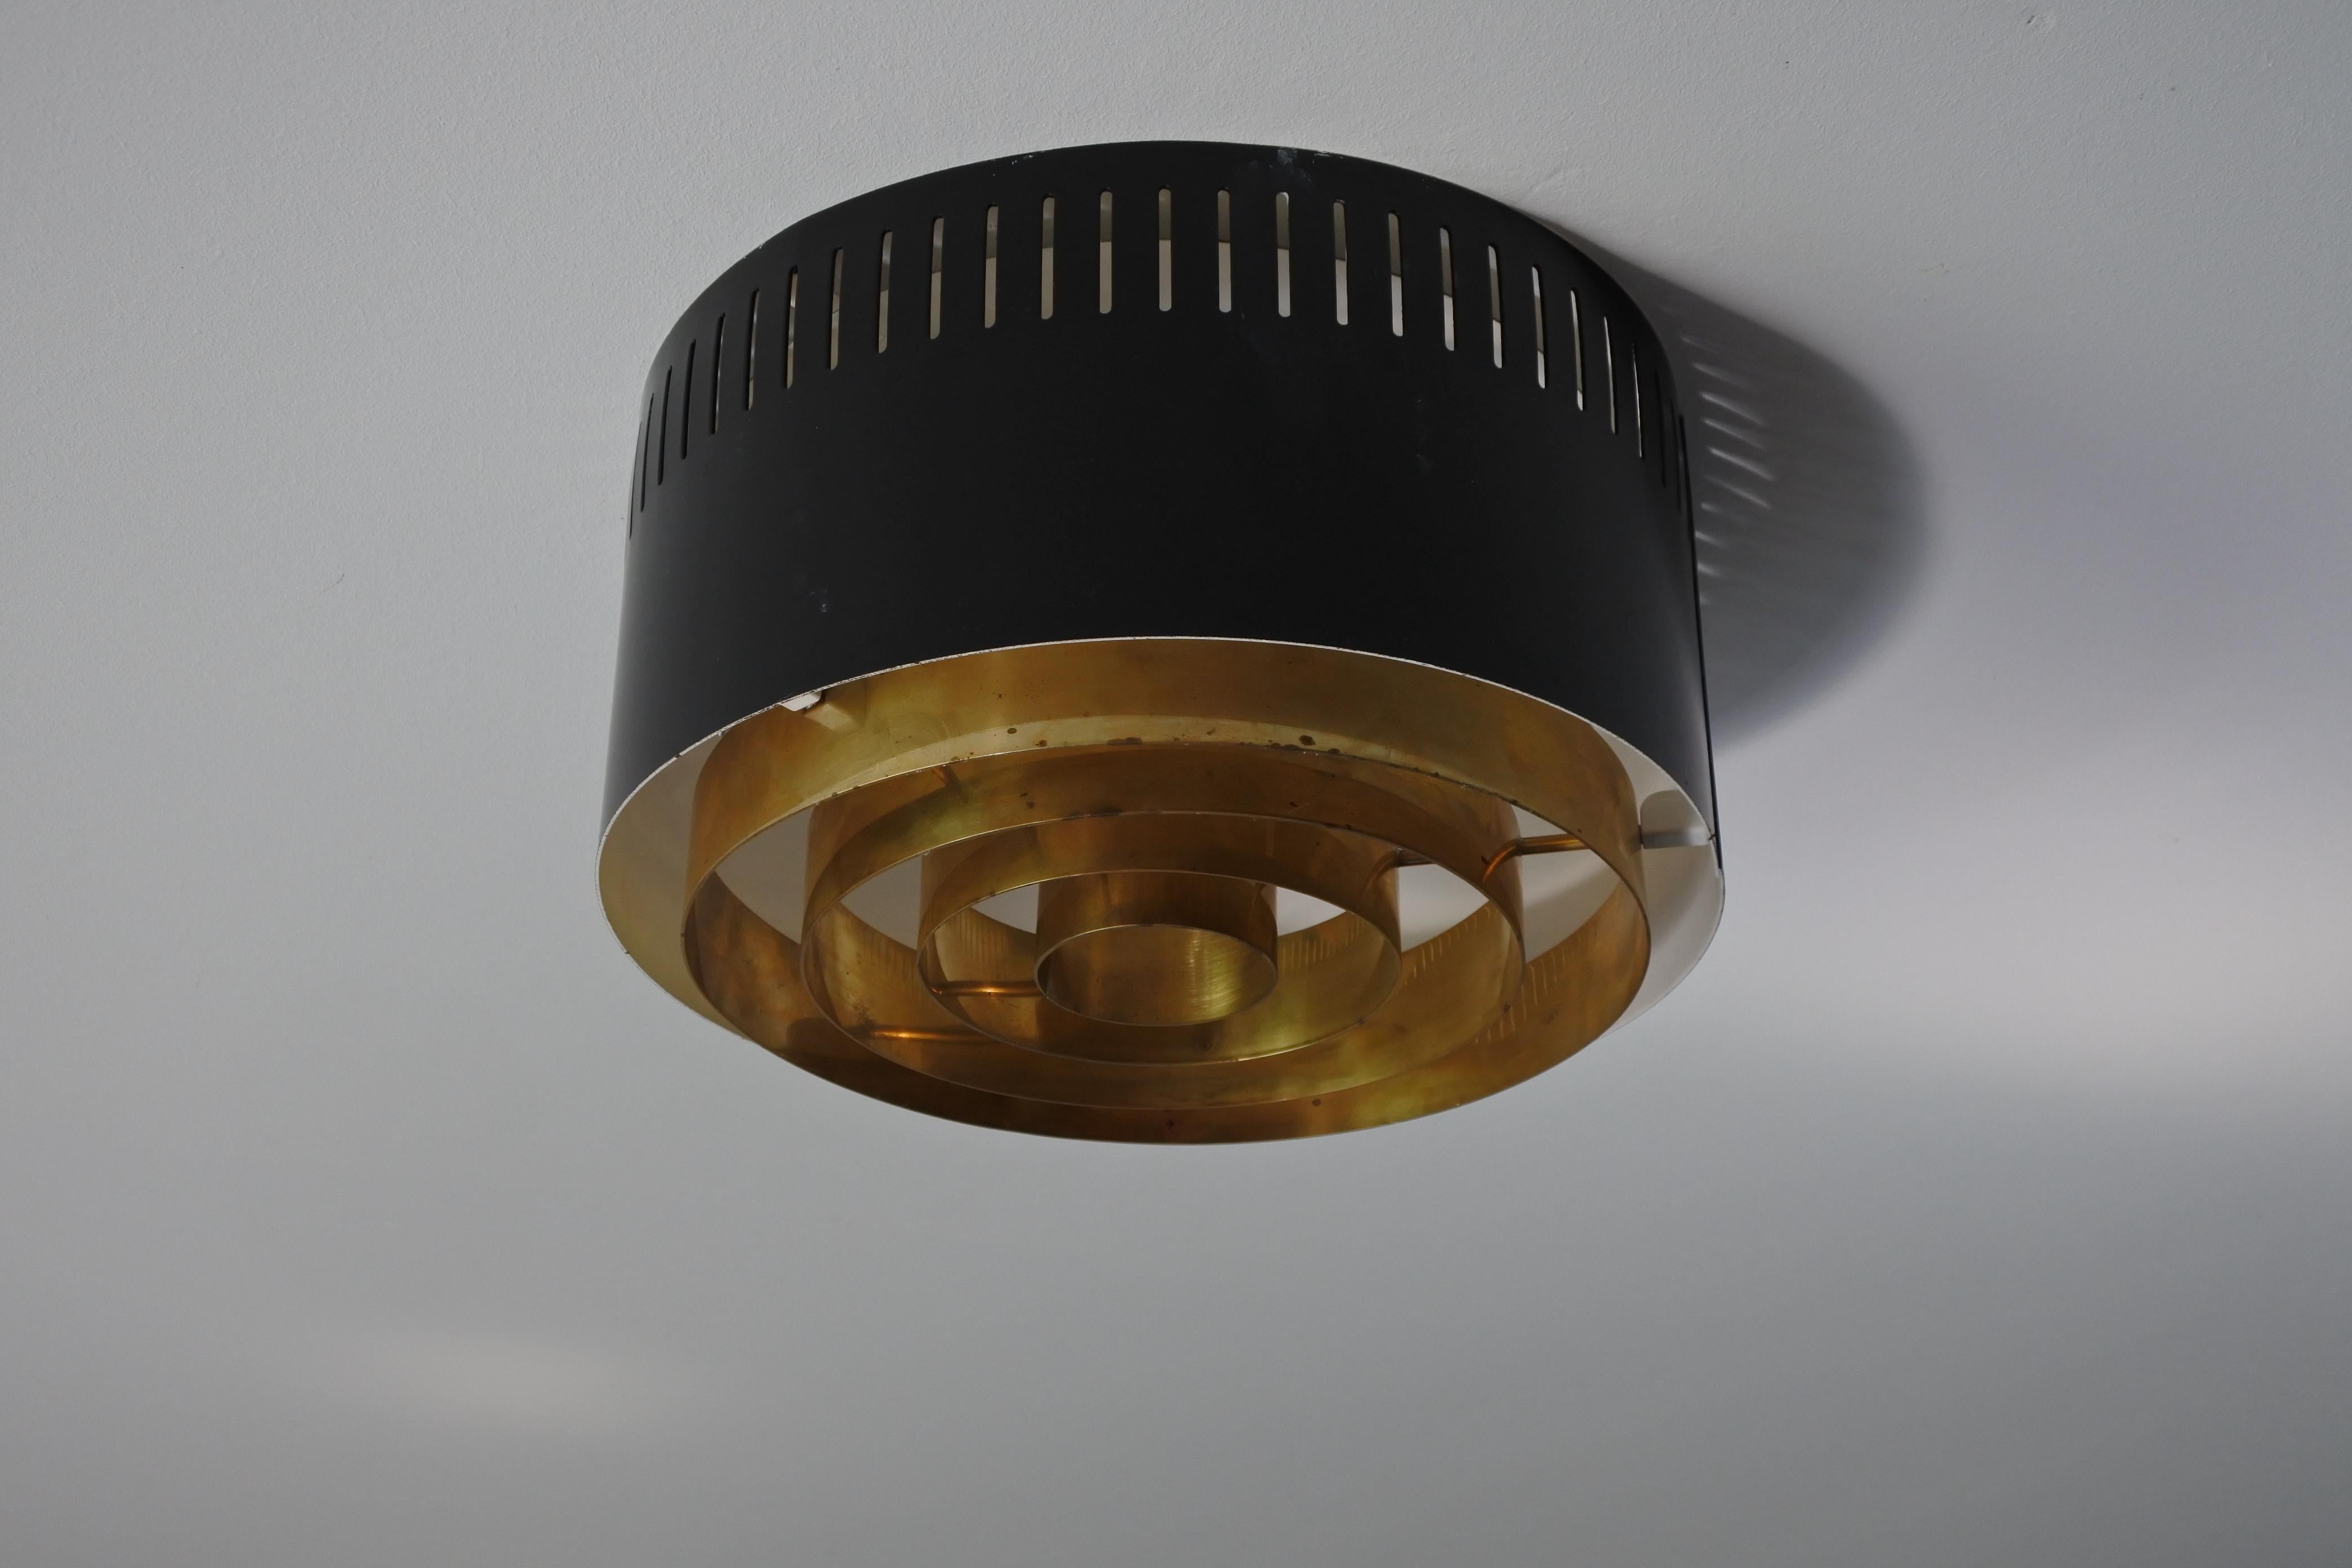 One flush mount ceiling light. 
Designed and manufactured in Finland in the 1960s. 
Black and white lacquered metal and solid brass. 
The light takes two E27 bulb.

Outstanding ceiling lamp.

Original electrical system. To be safe, the lamp